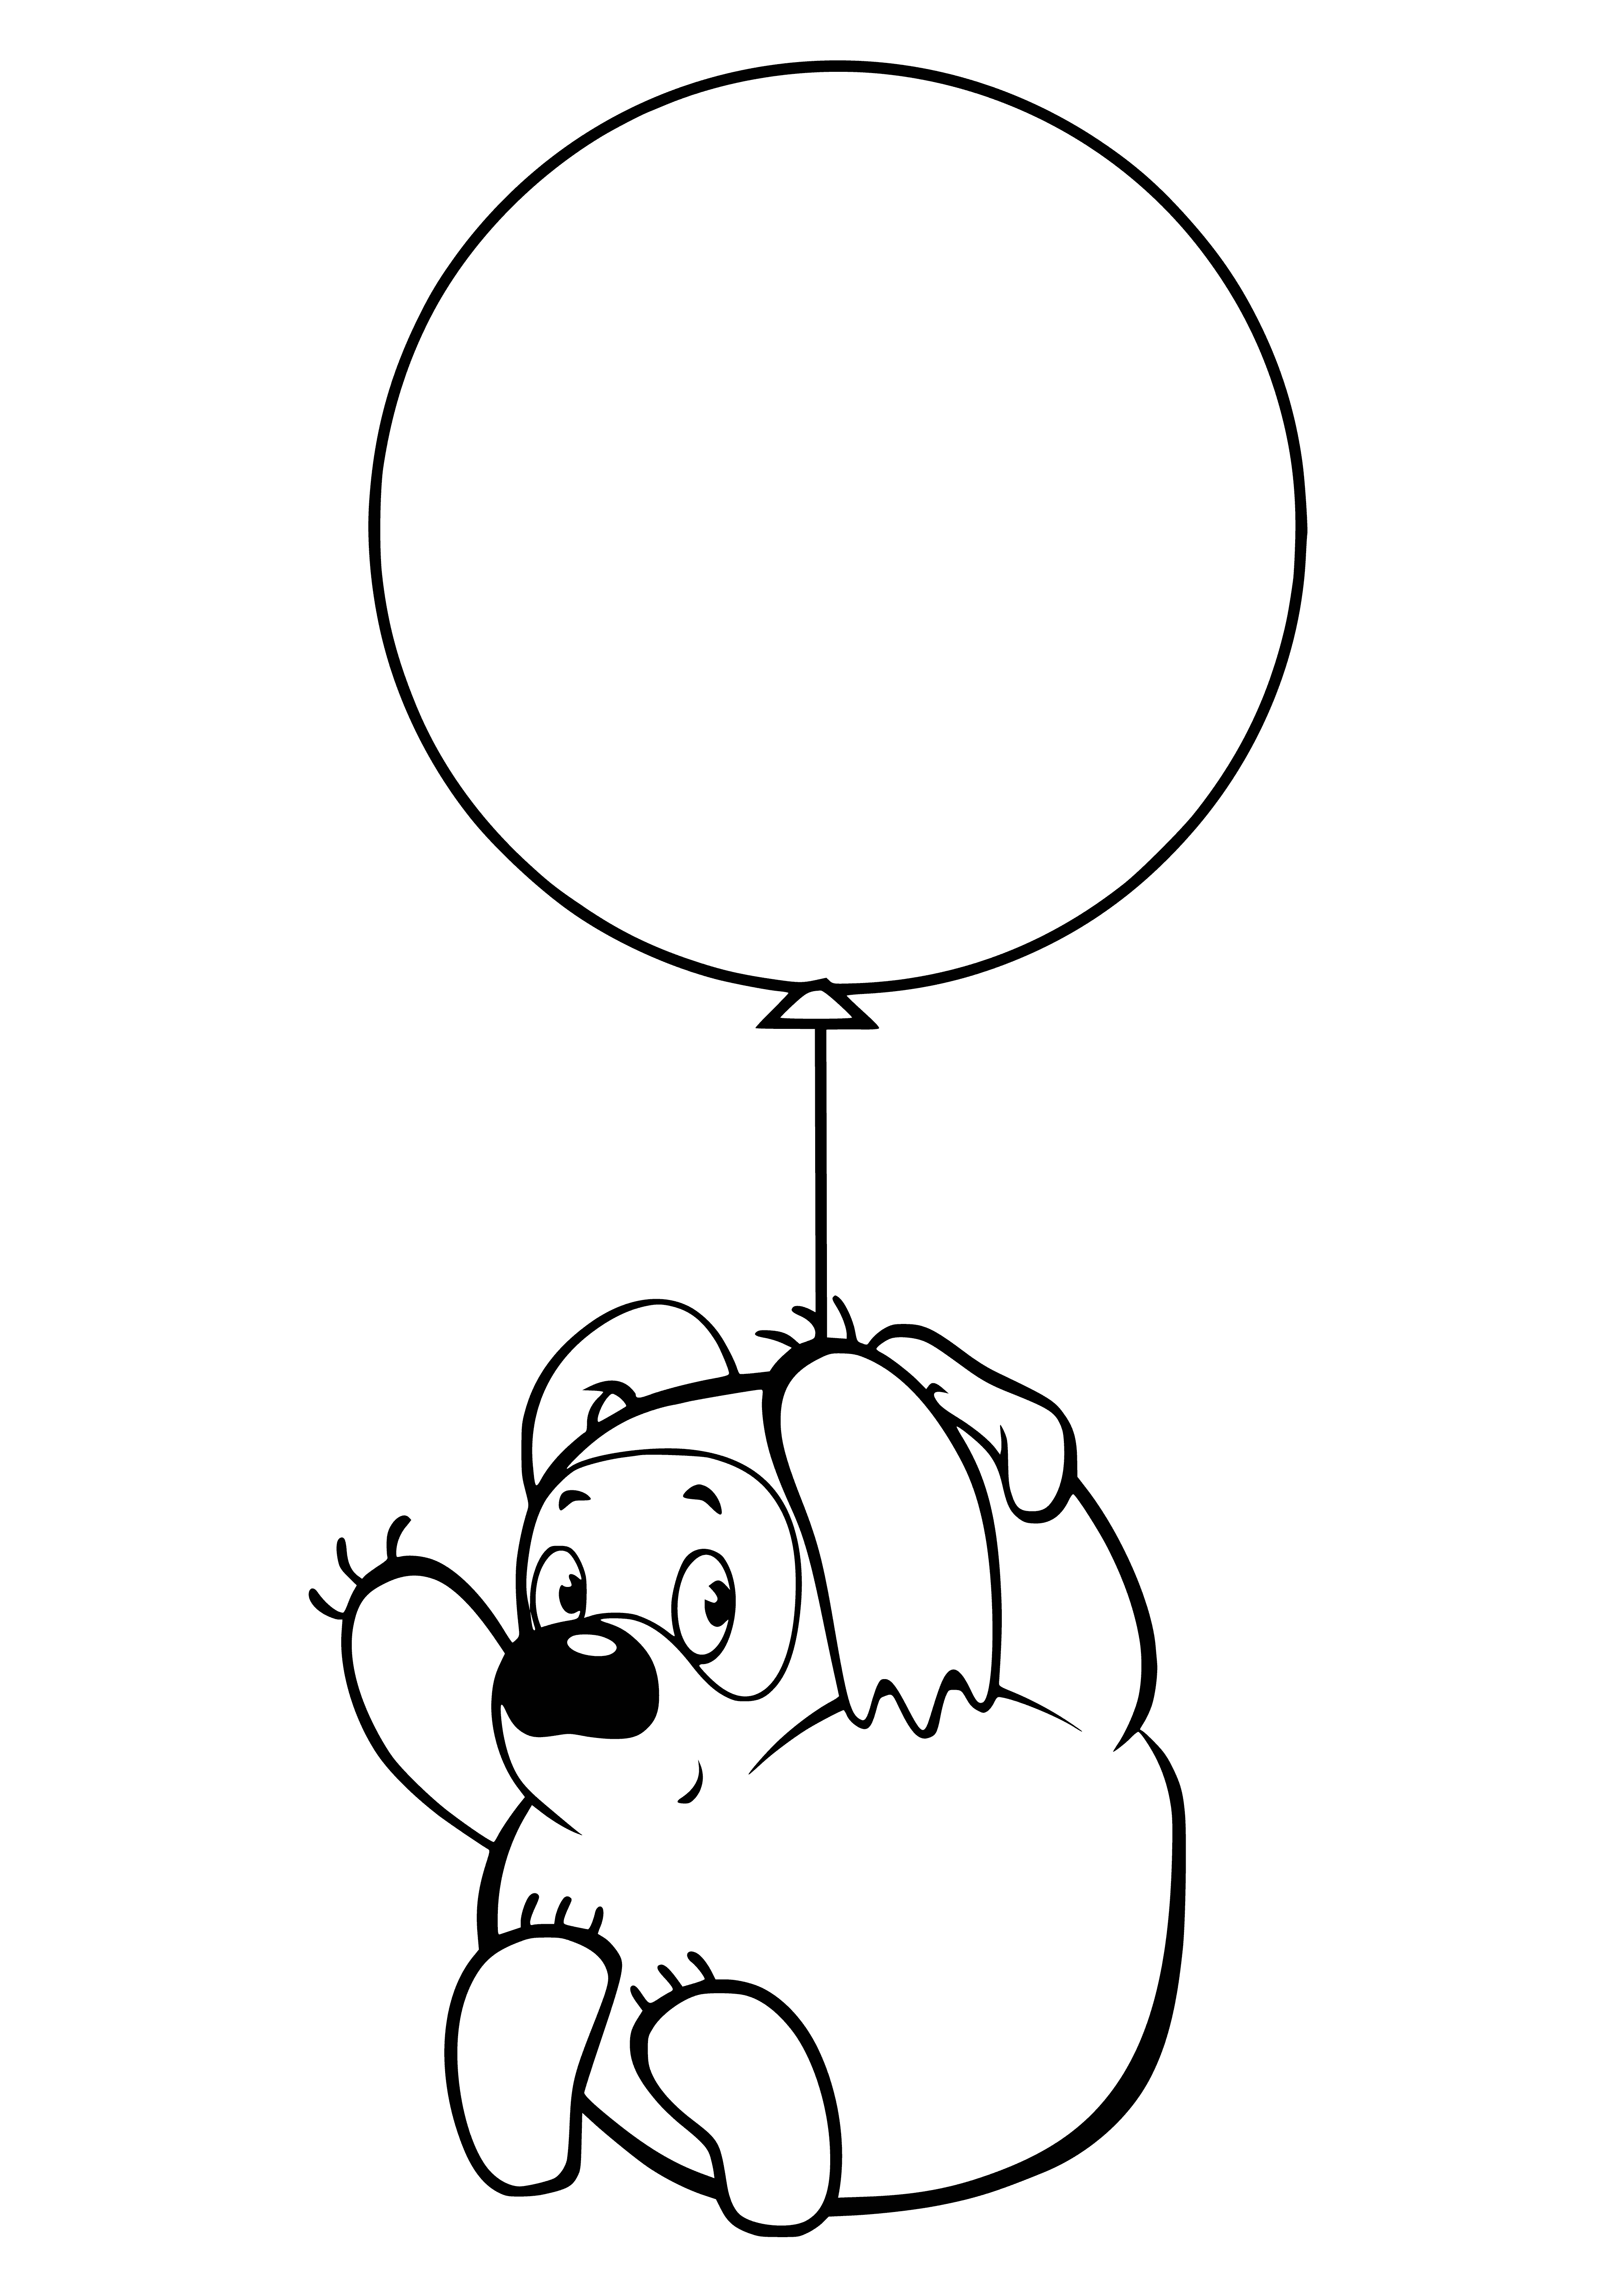 coloring page: A brown bear trying to pop a big red balloon with its mouth, twisting its body in the attempt.